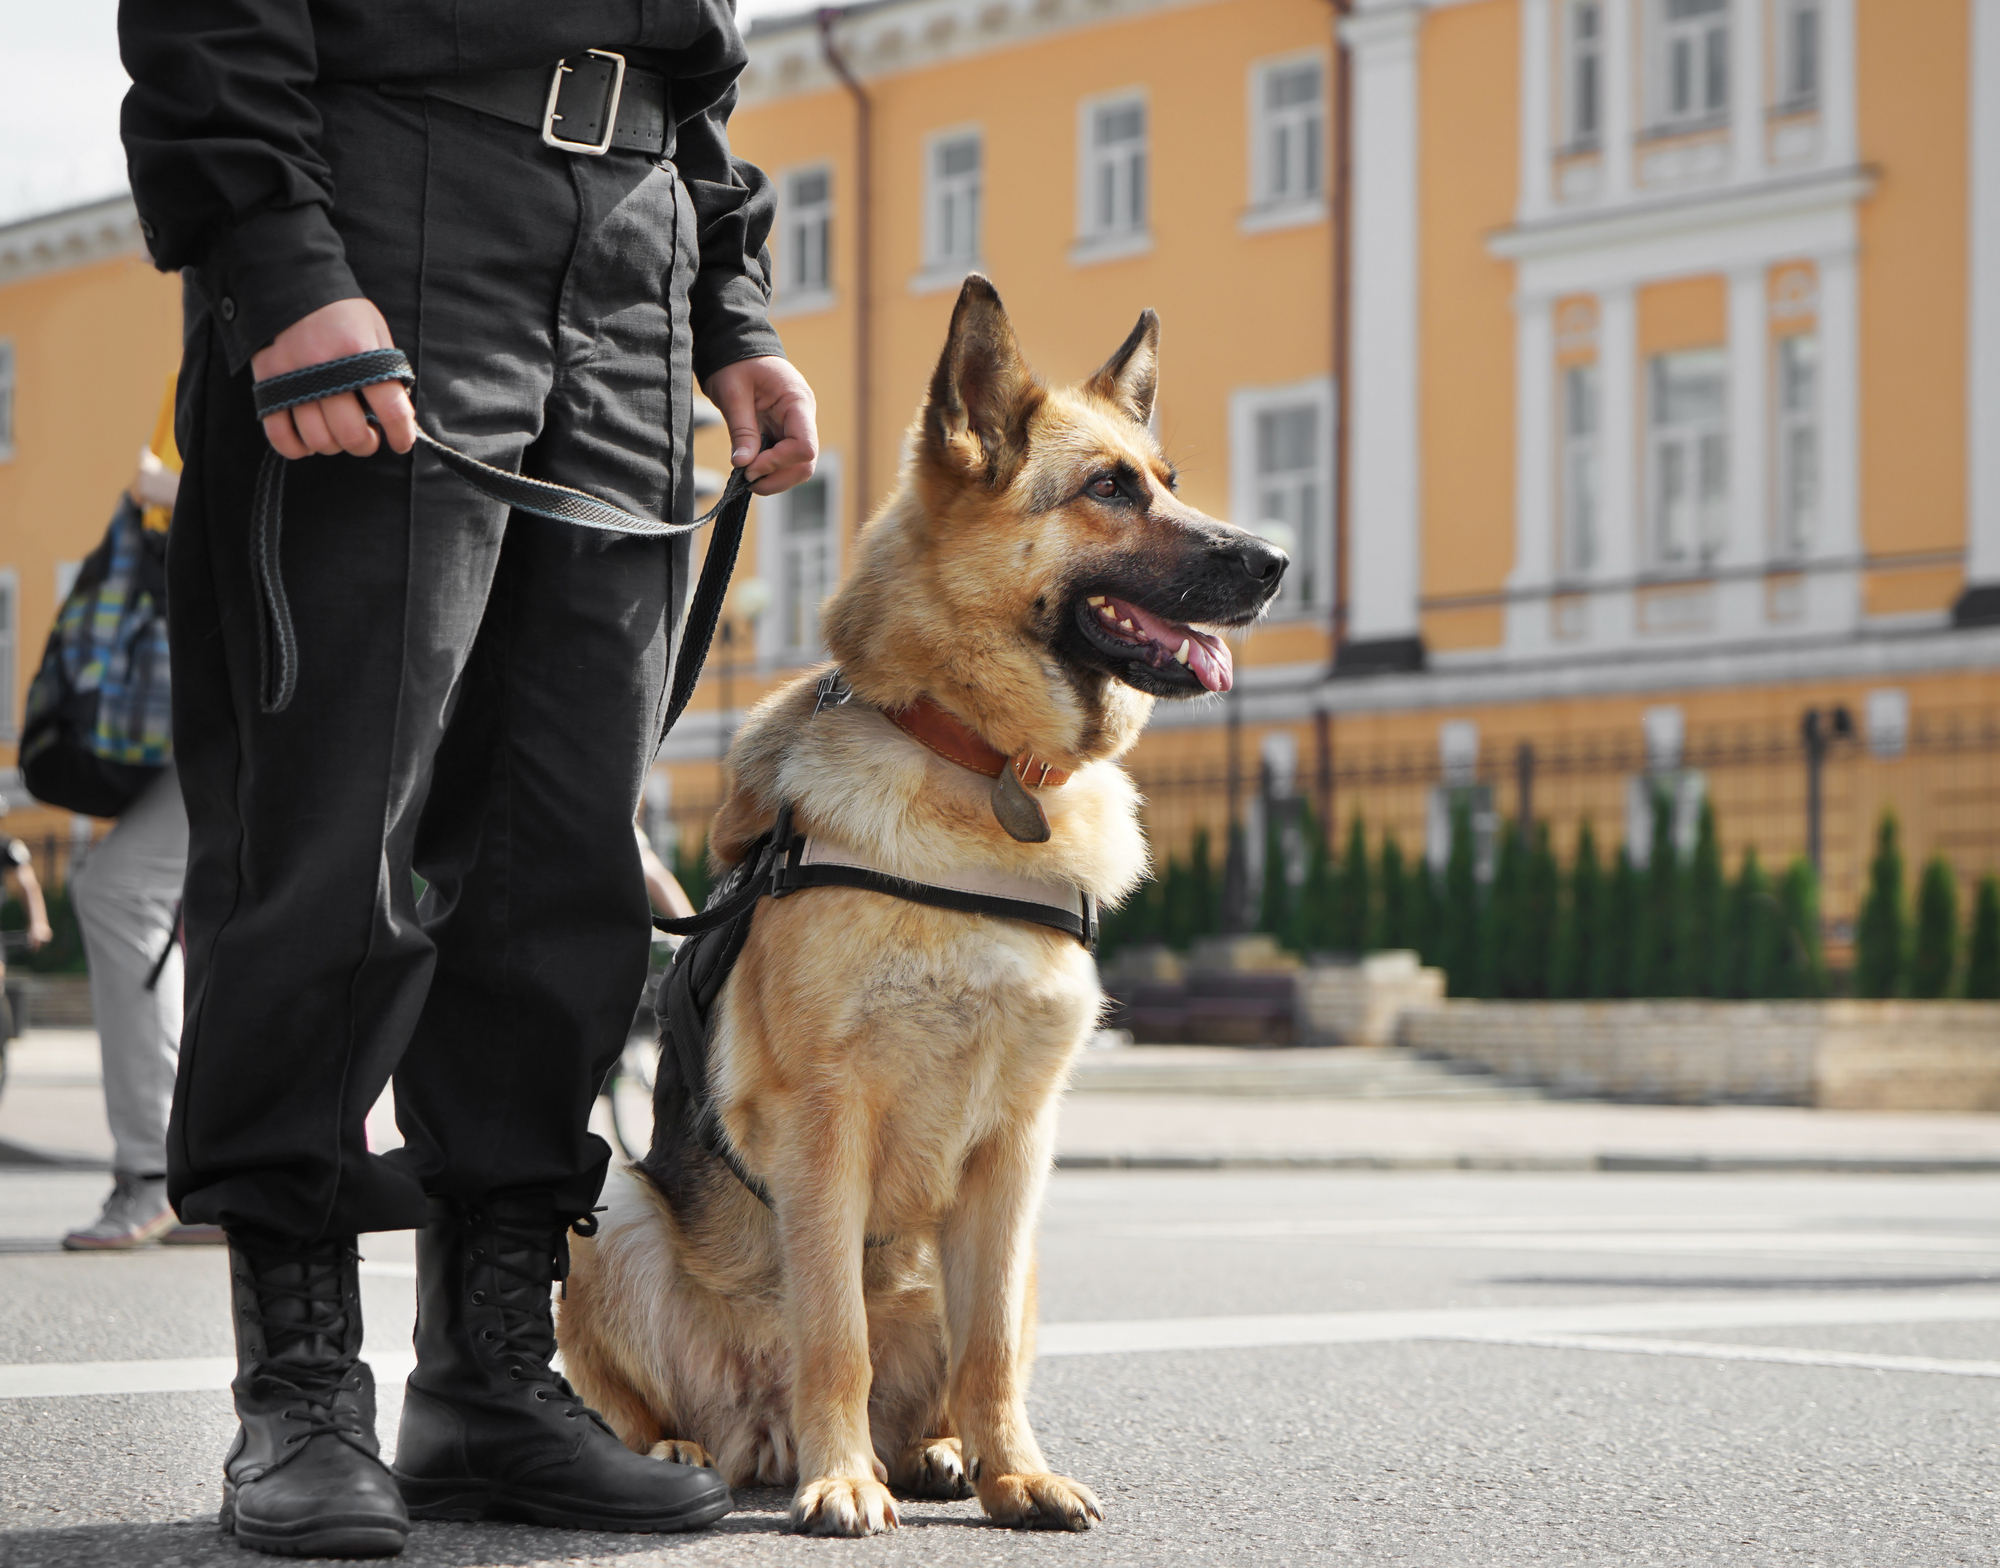 German Shepherd, one of the best executive protective dogs, seated next to a handler on a city street